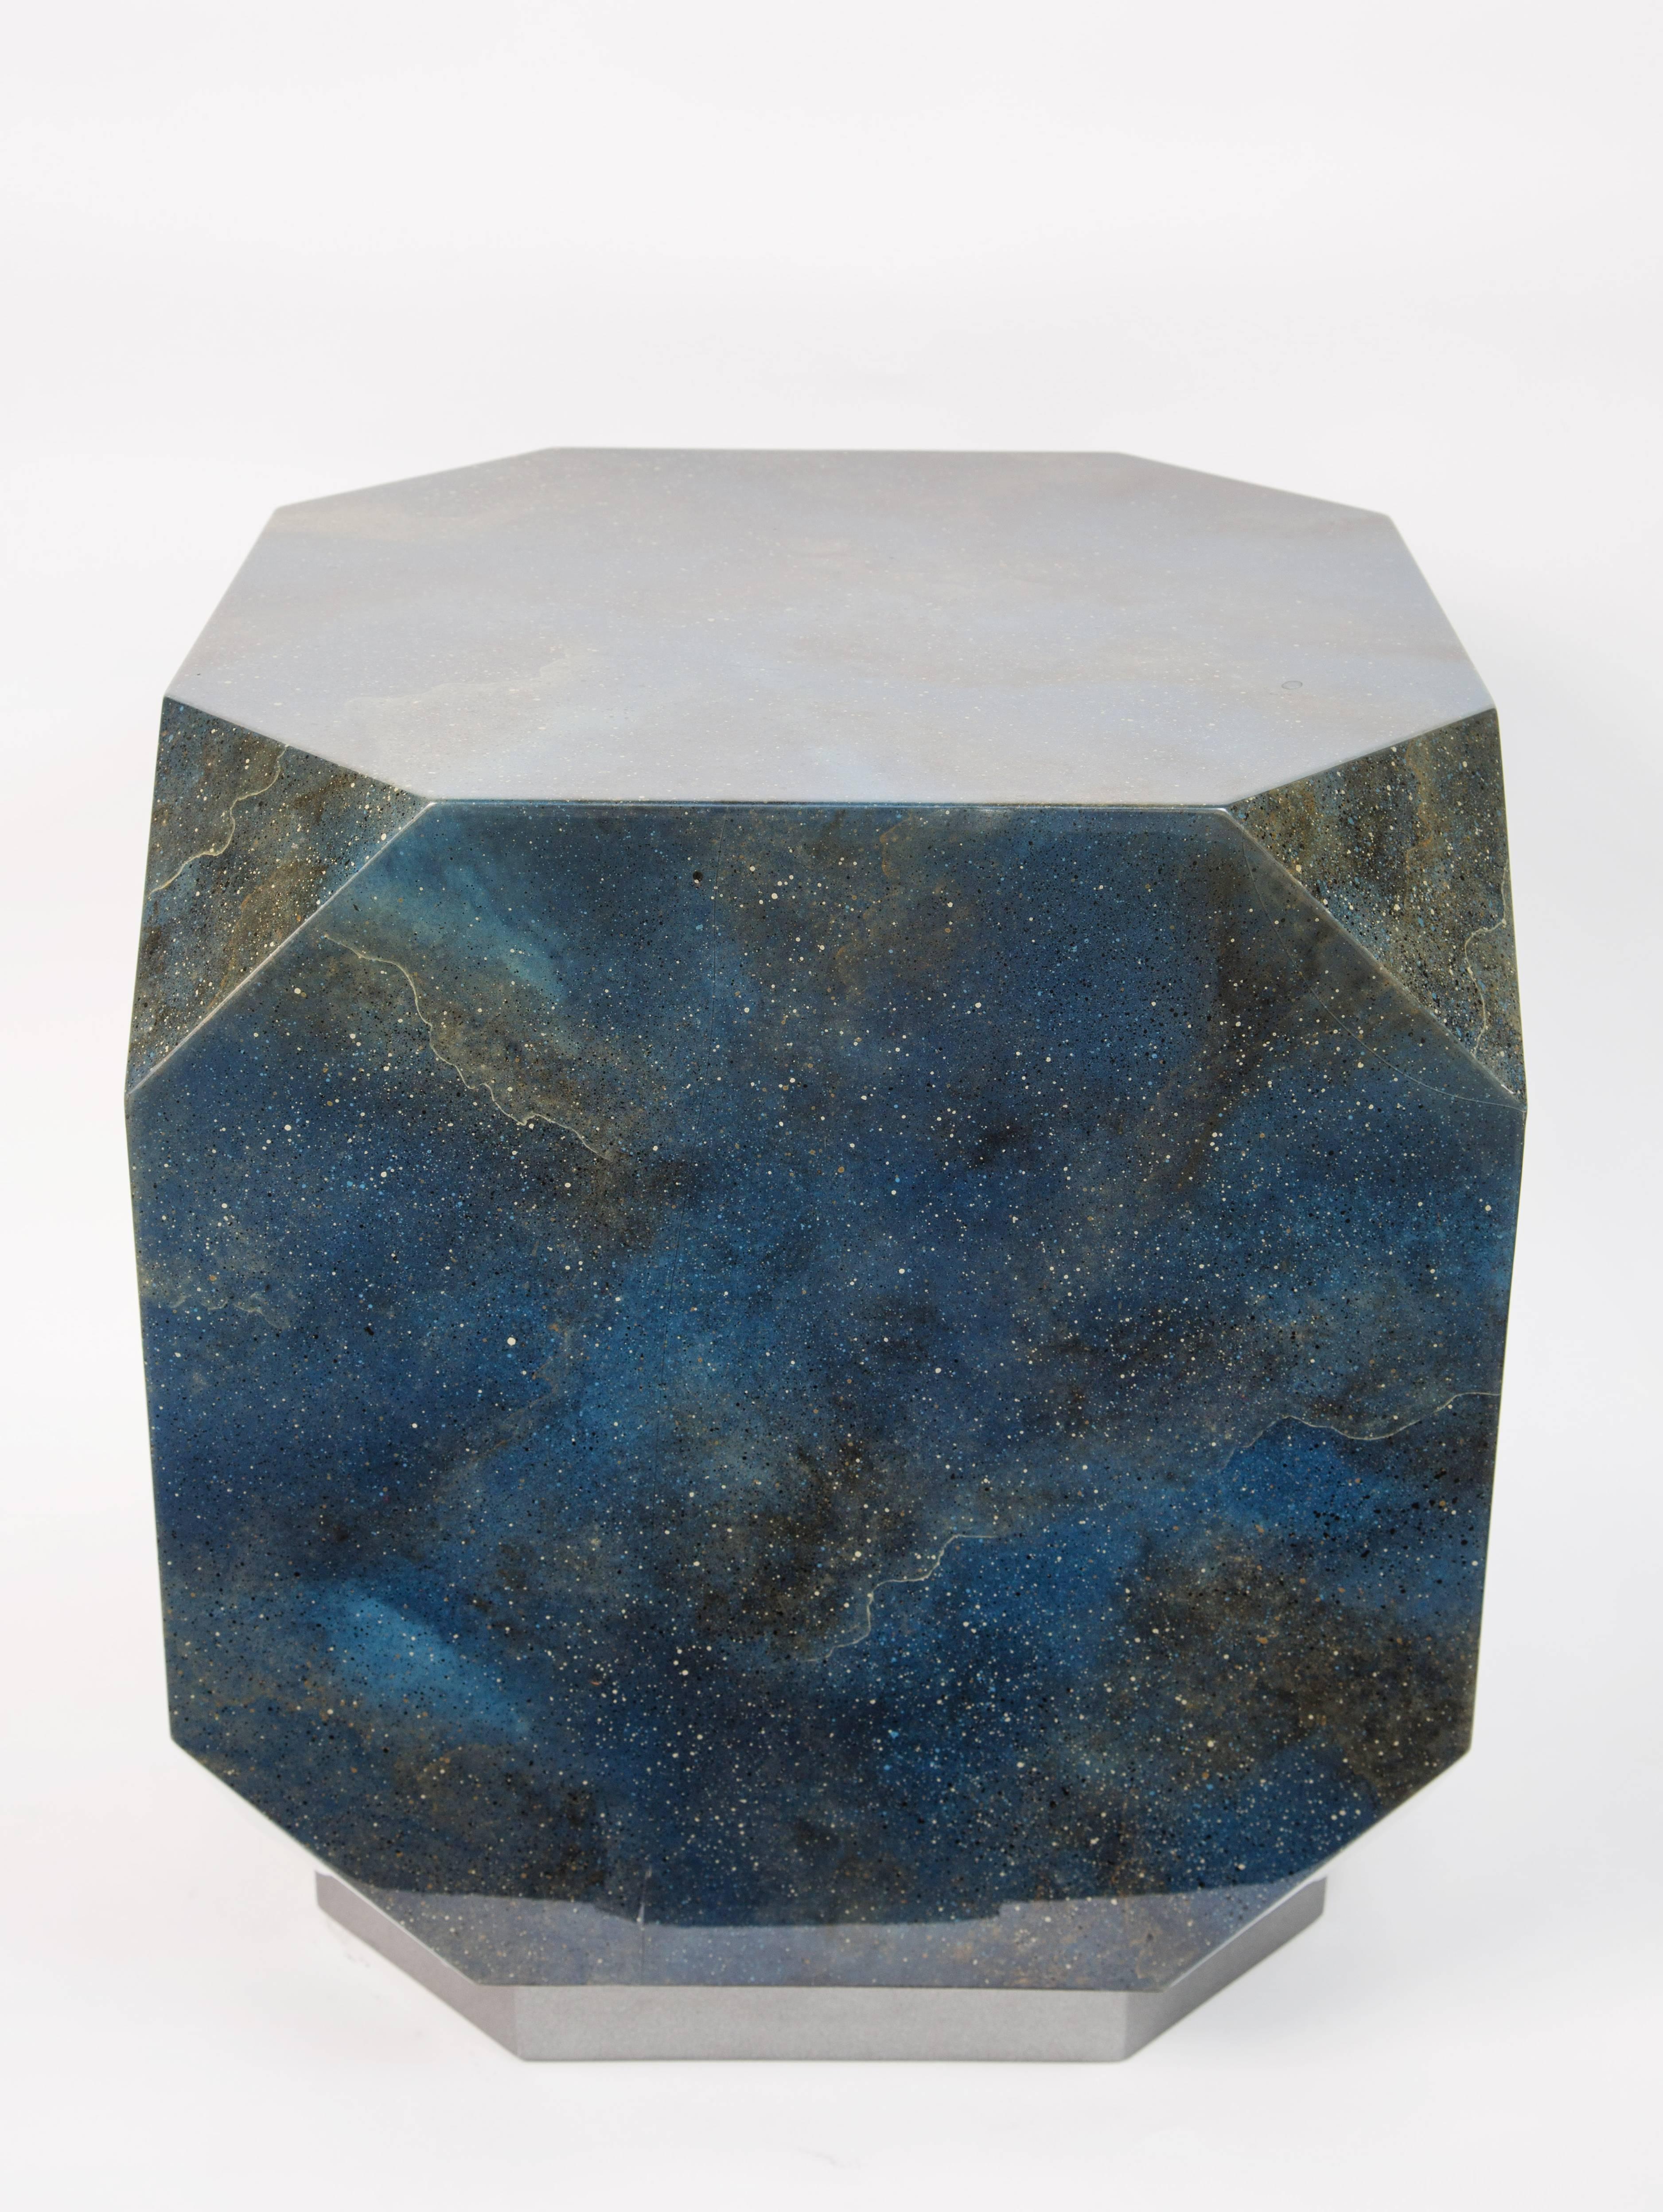 Geometric, faceted resin side table resembling lapis lazuli on brushed metal base, 1980s.